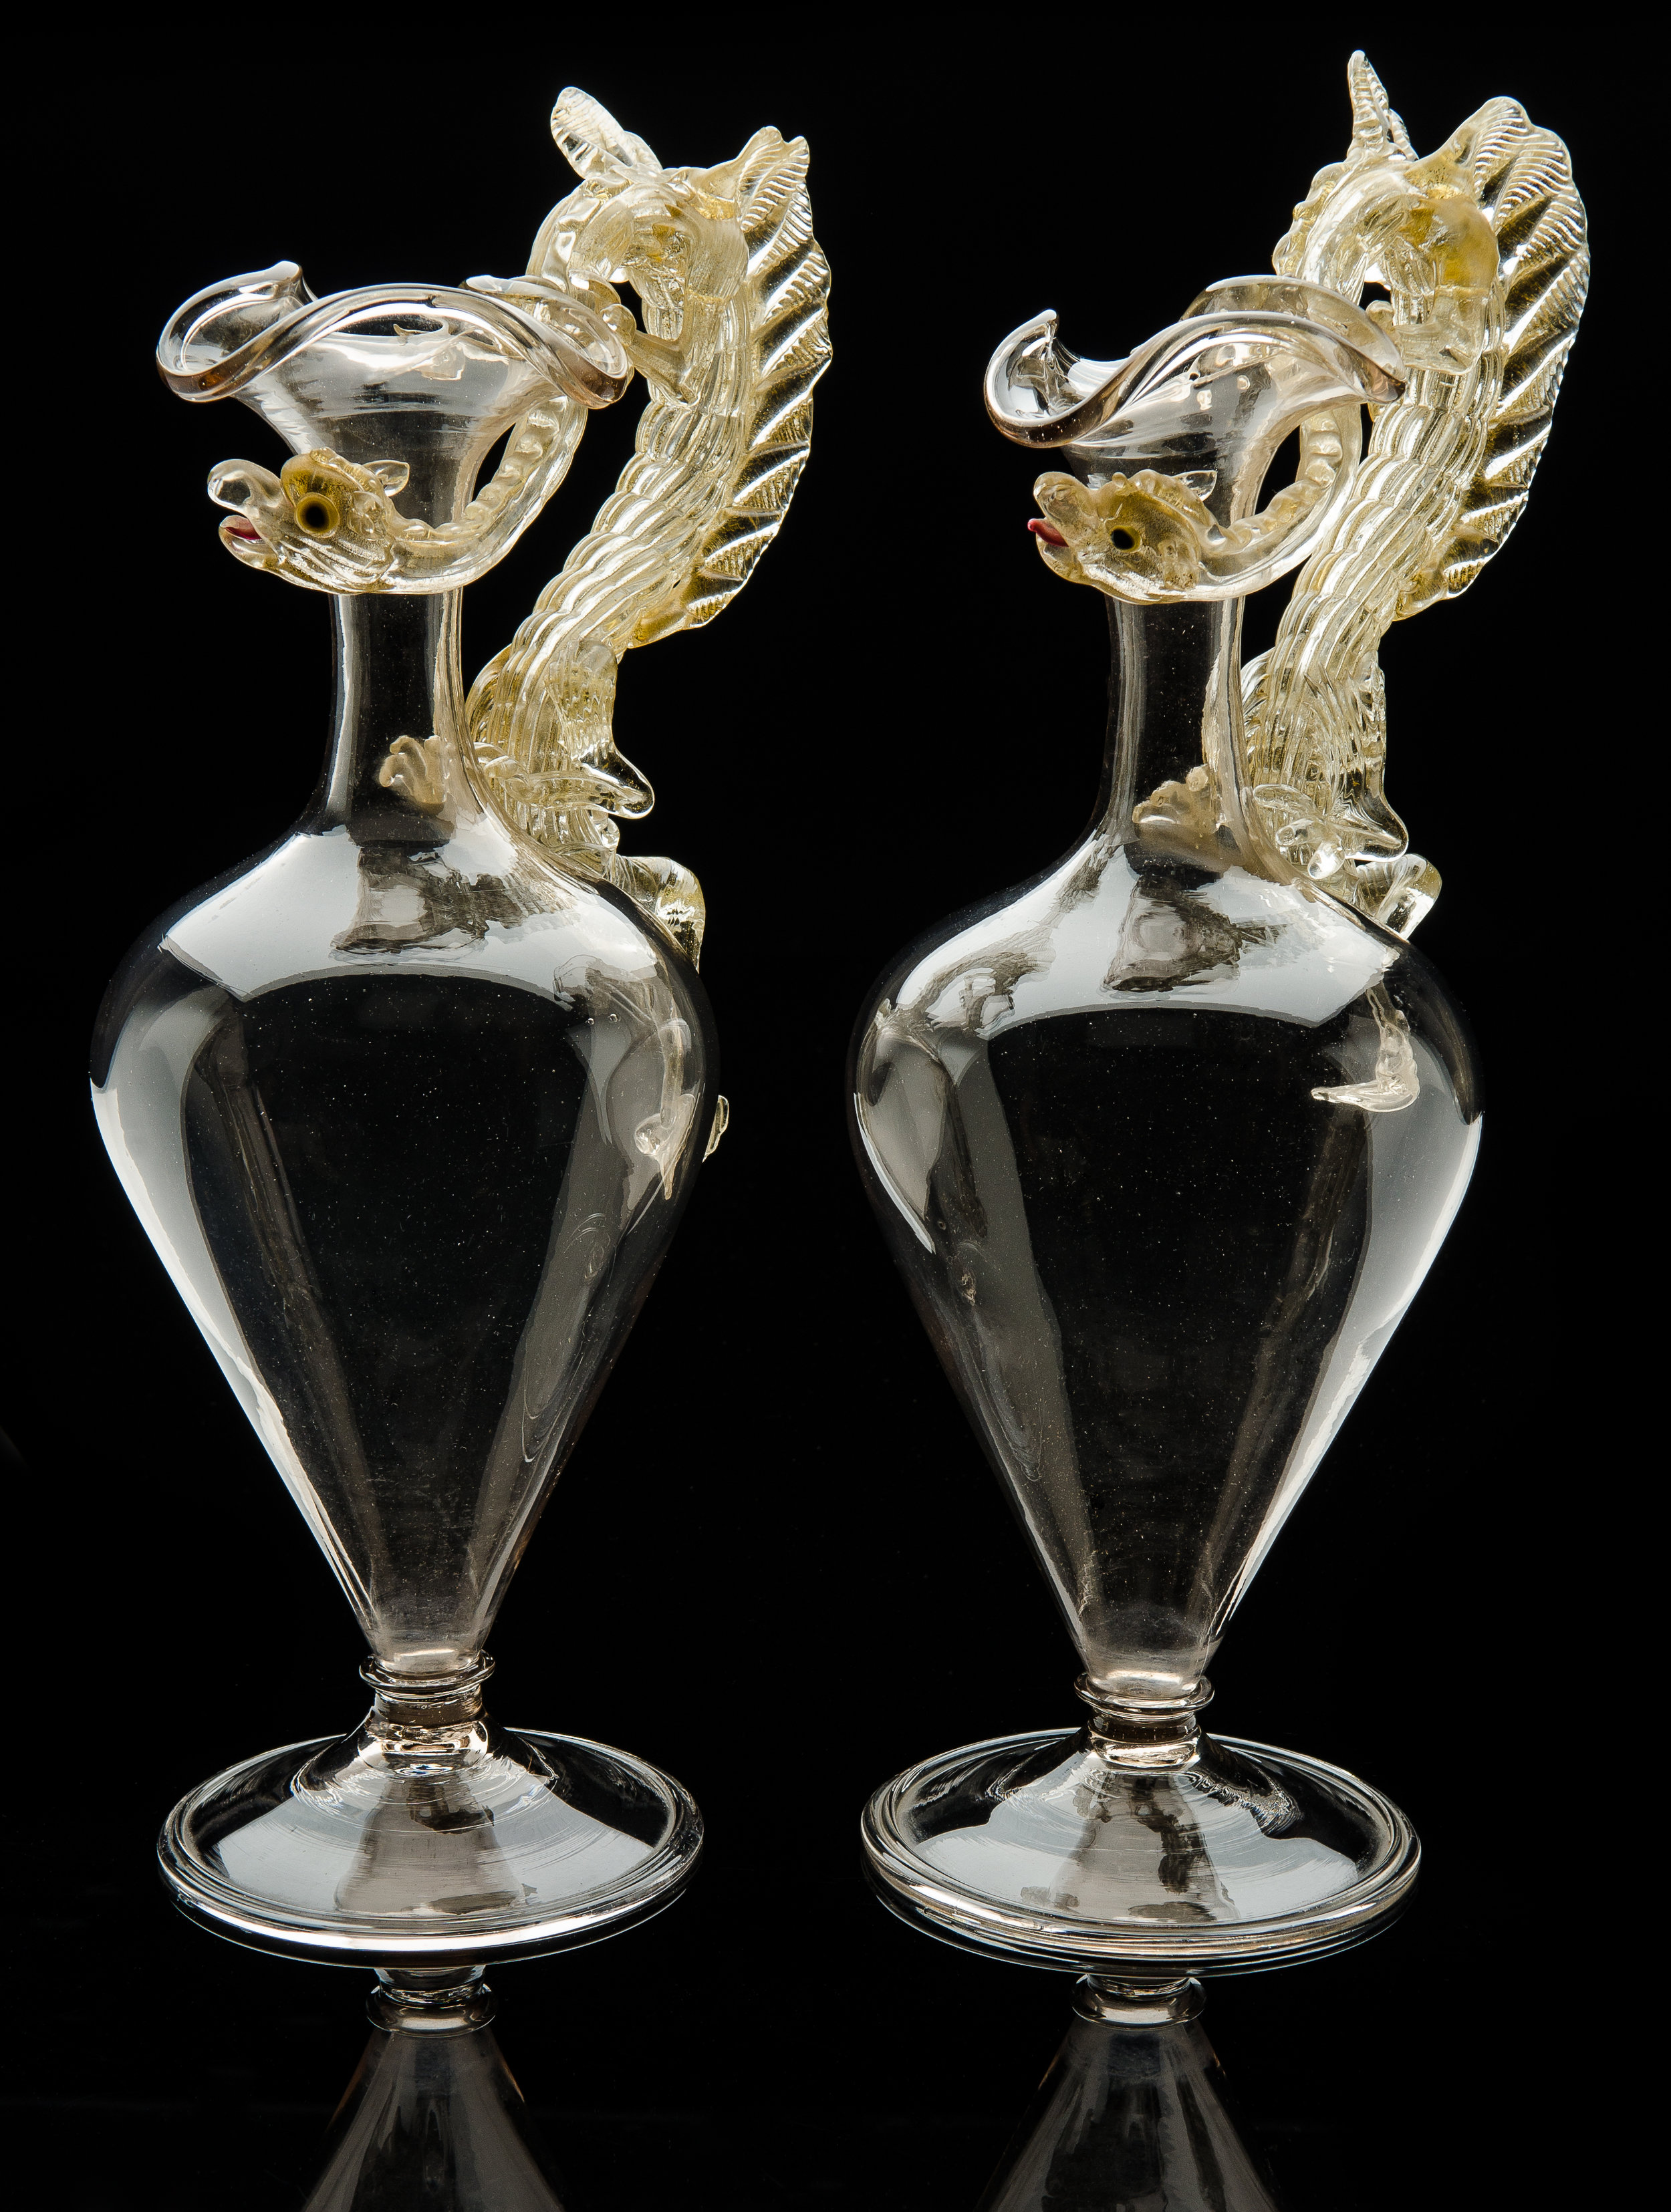  Salviati and Company,  Pair of Dragon Handled Ewers  (1880, glass, 14.75 inches), VV.117 